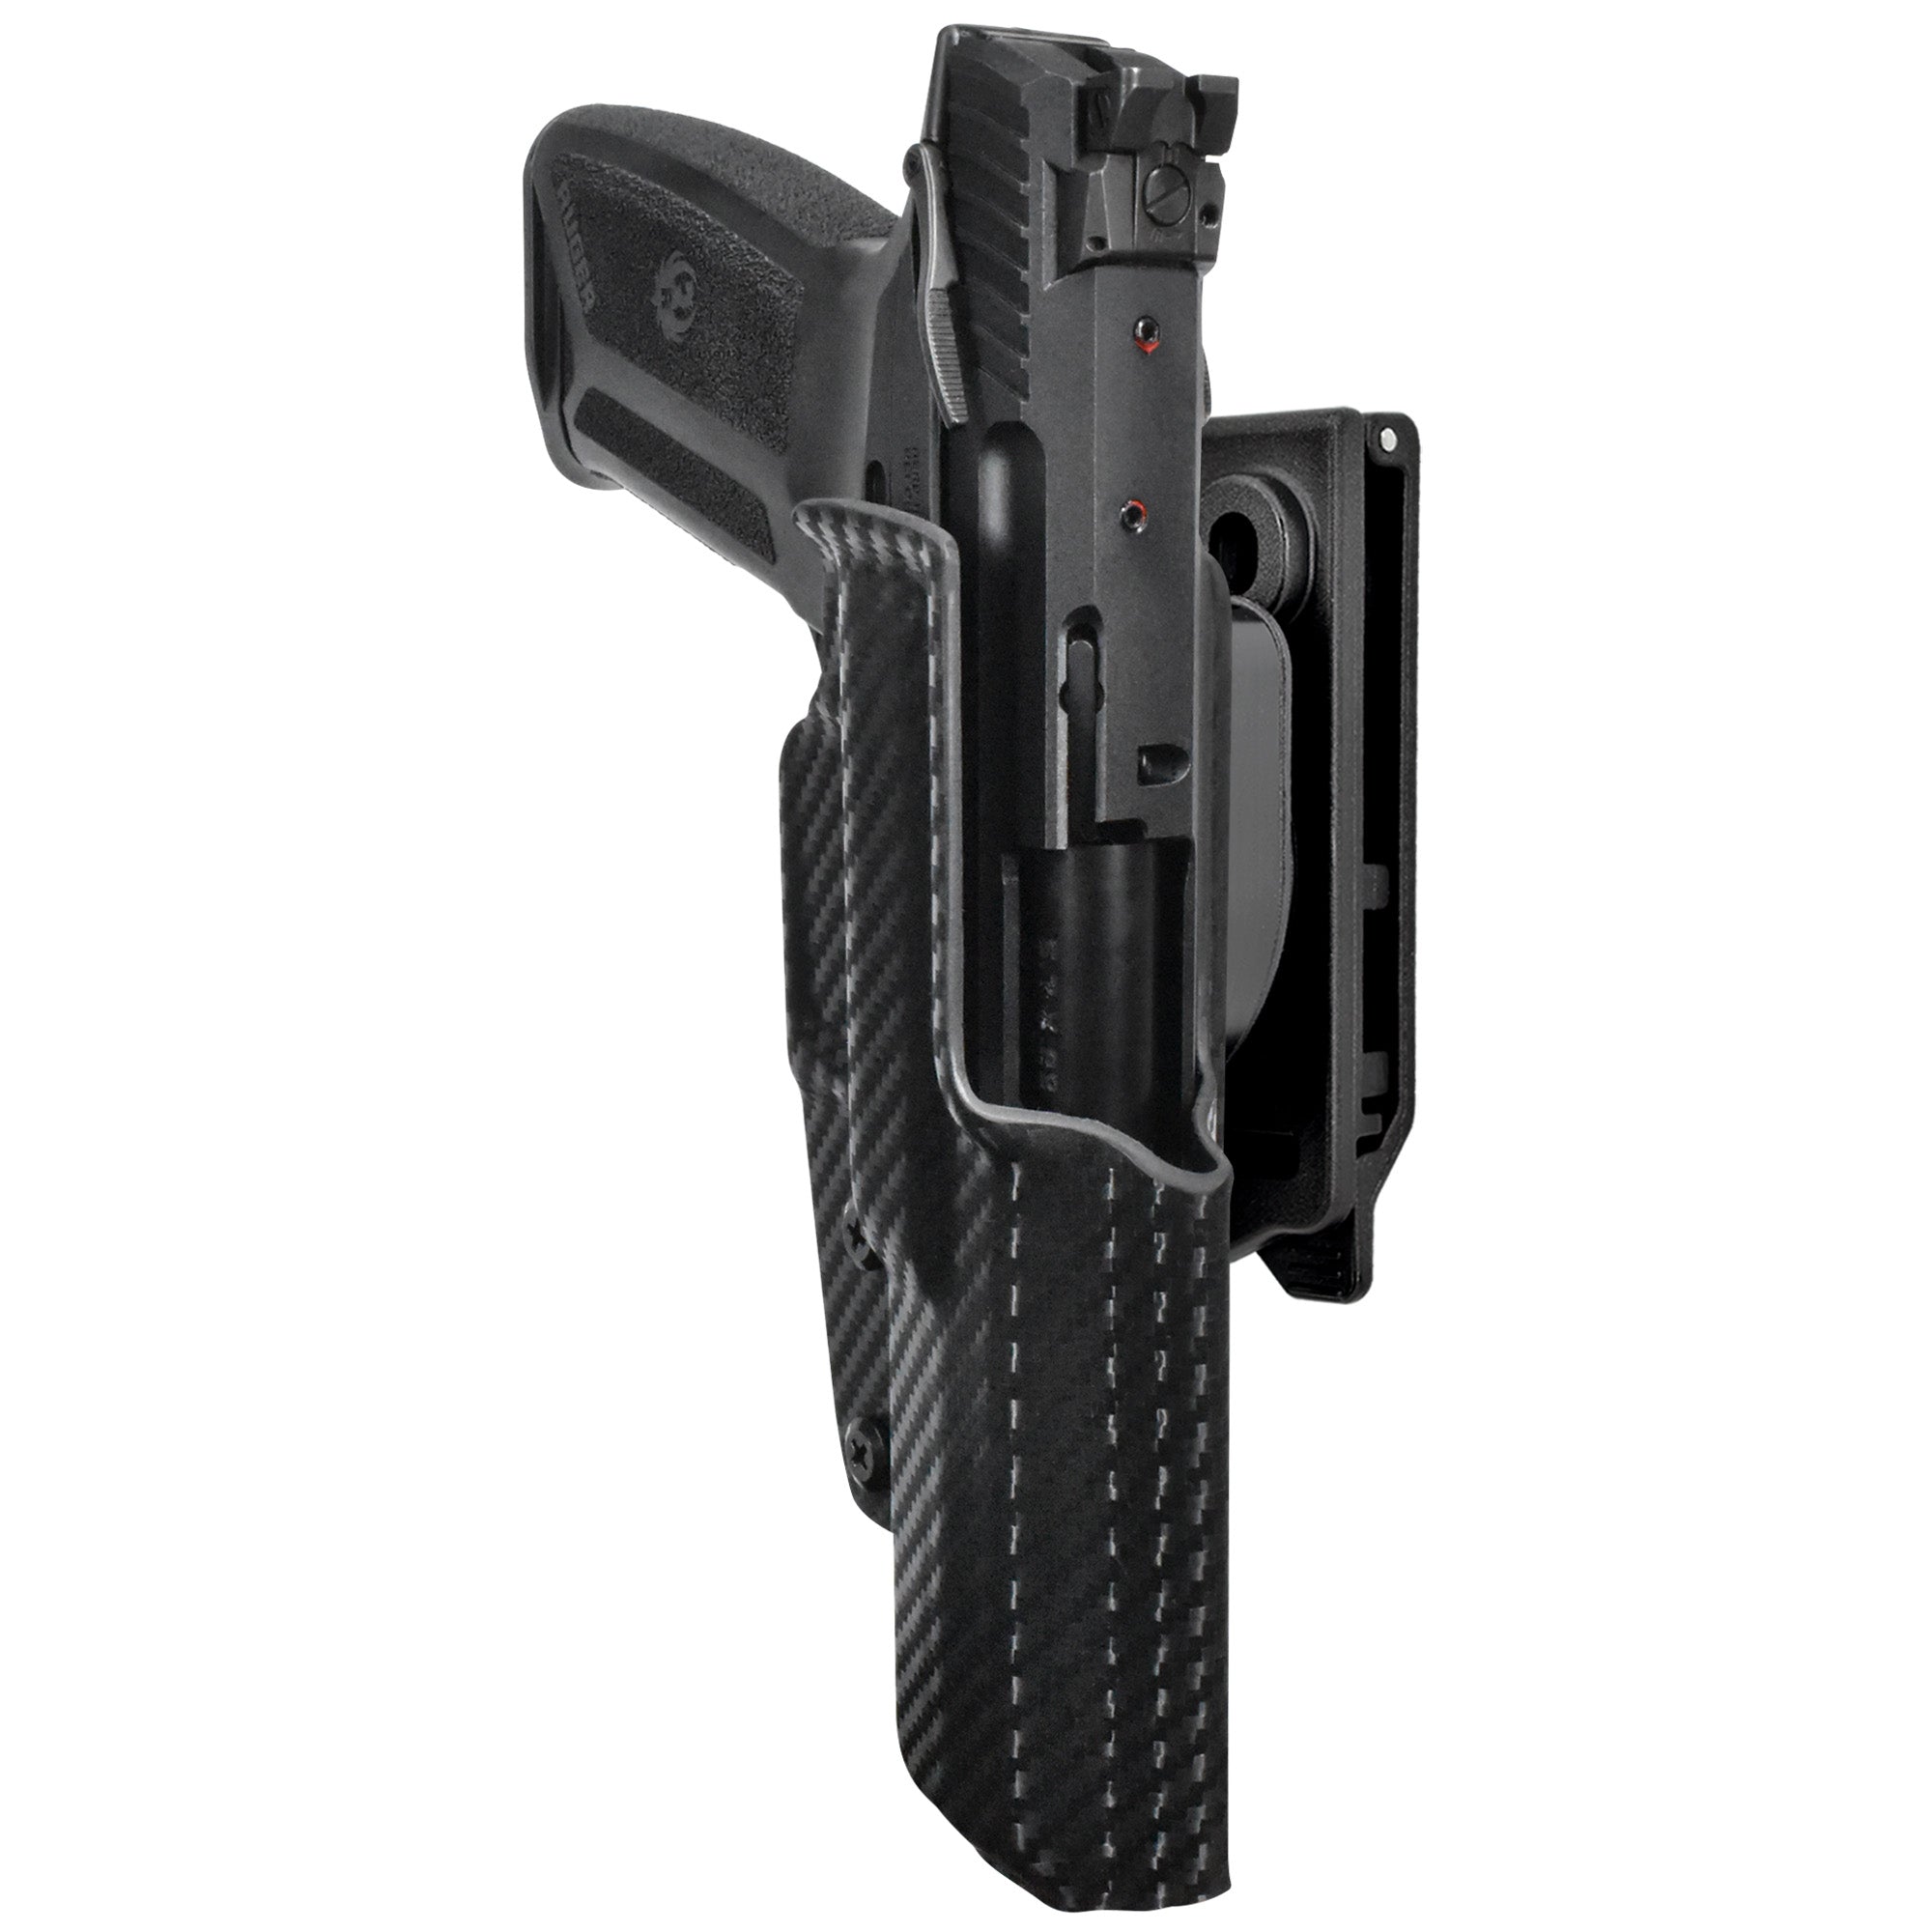 Ruger 5.7 Quick Release IDPA Holster in Carbon Fiber